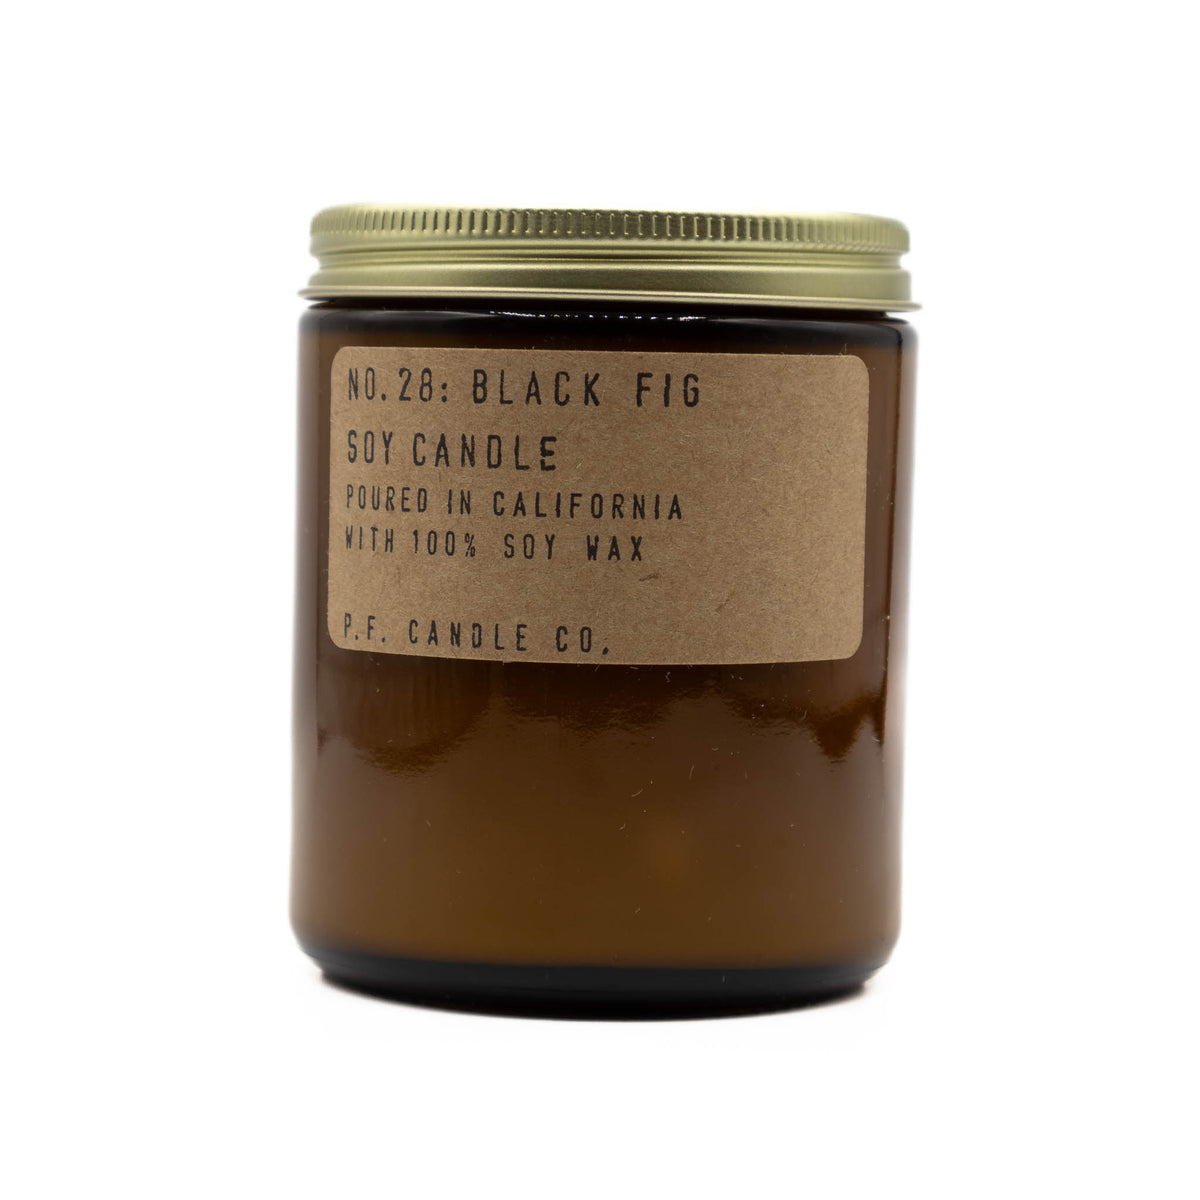 PF Candle Co Black Fig